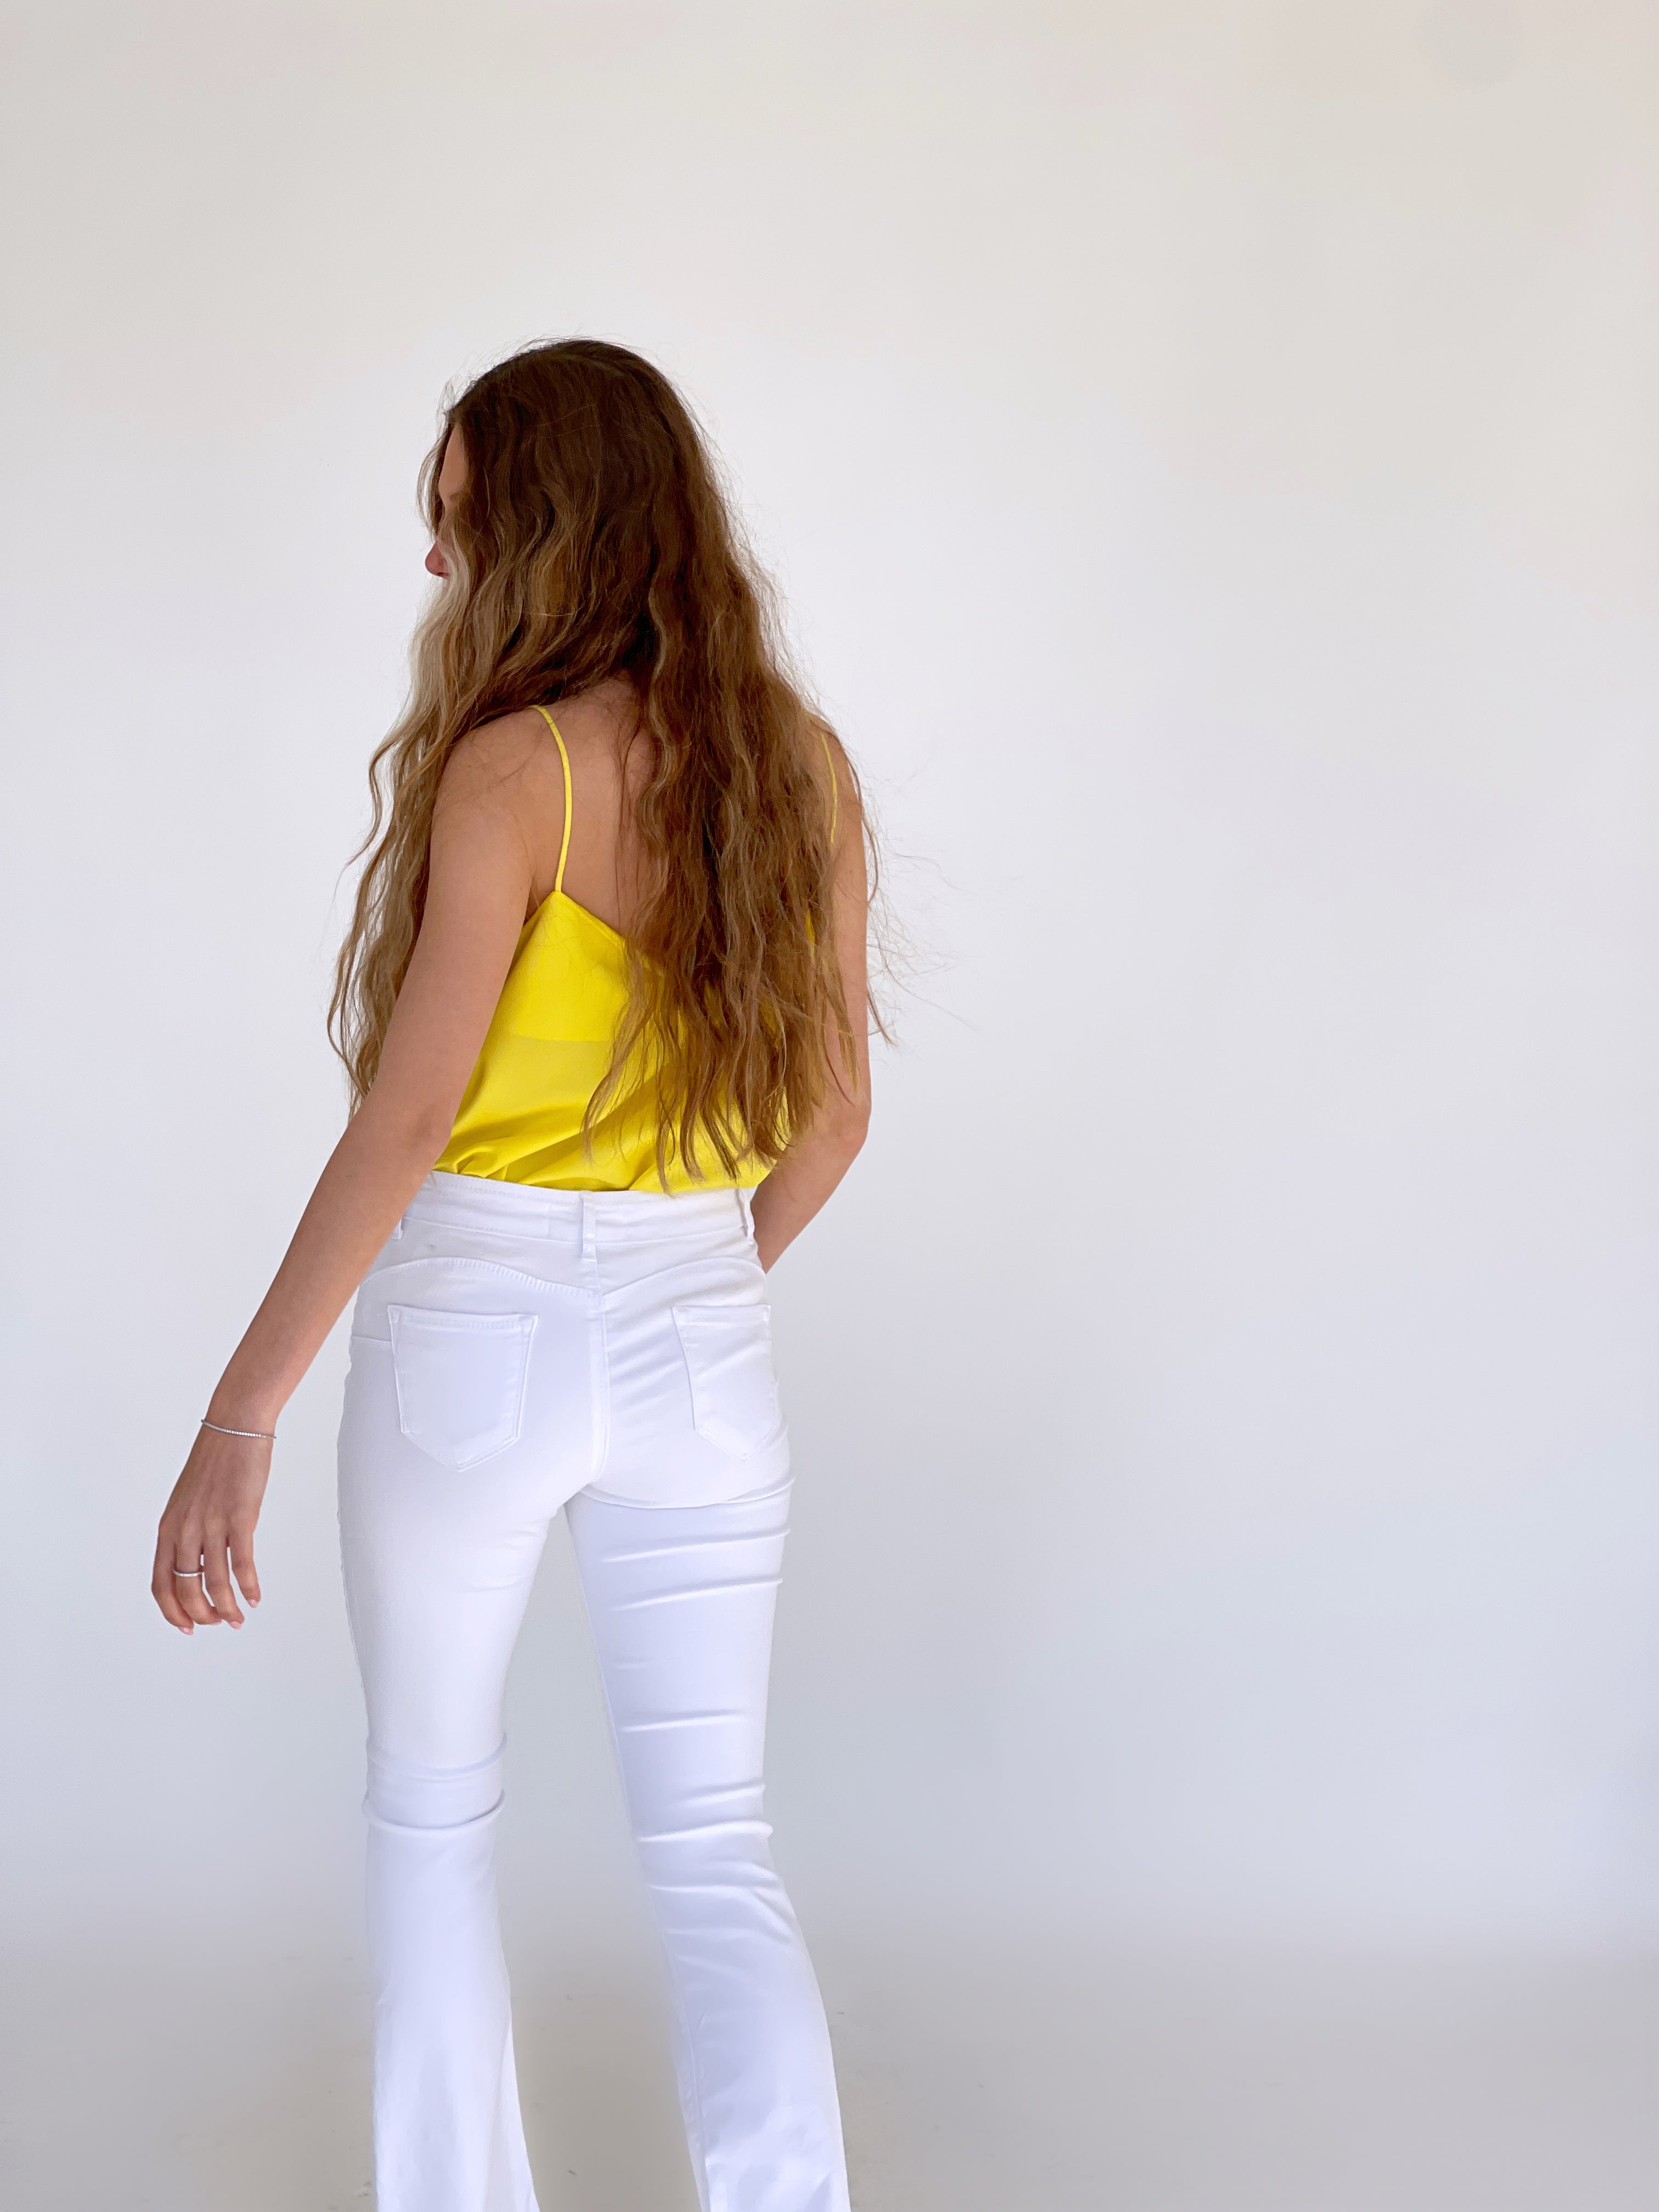 CAMI TOP WITH COWL NECK IN YELLOW - Top - LE TRÉ